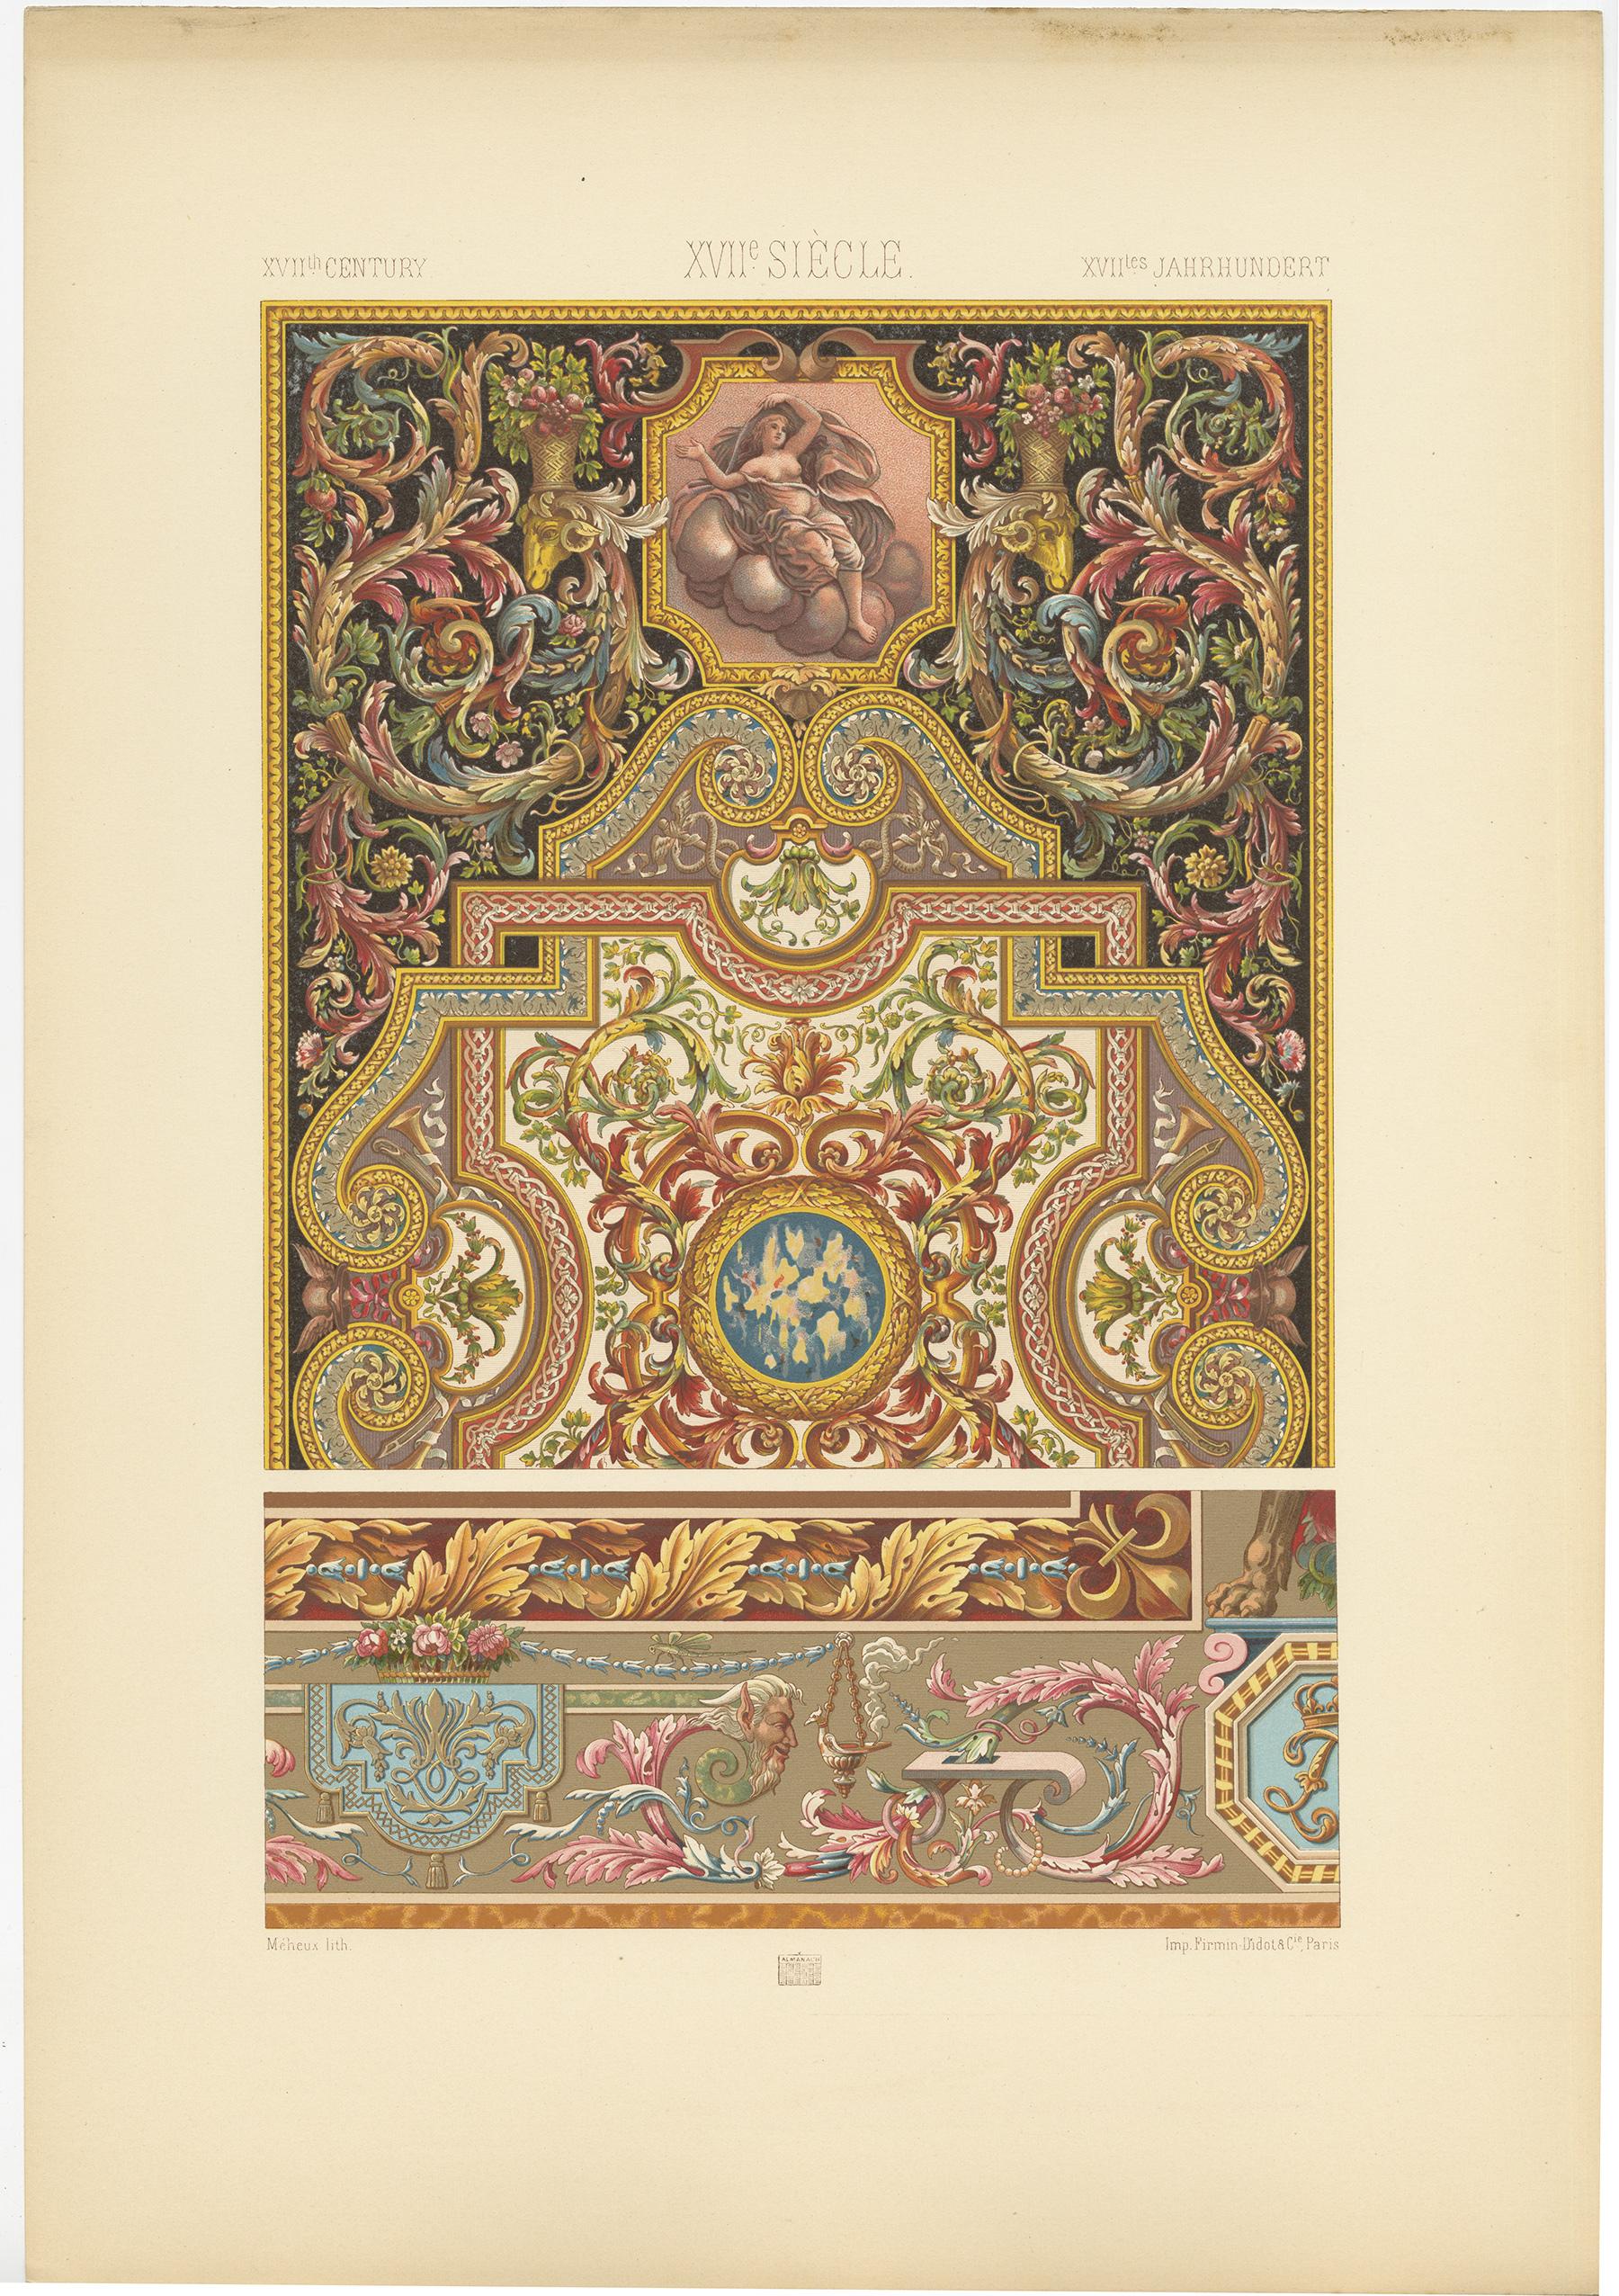 Antique print titled '17th Century - XVIIc Siècle - XVIILes Jahrhundert'. Chromolithograph of Details from a carpet and a wall hanging, France ornaments. This print originates from 'l'Ornement Polychrome' by Auguste Racinet. Published circa 1890.